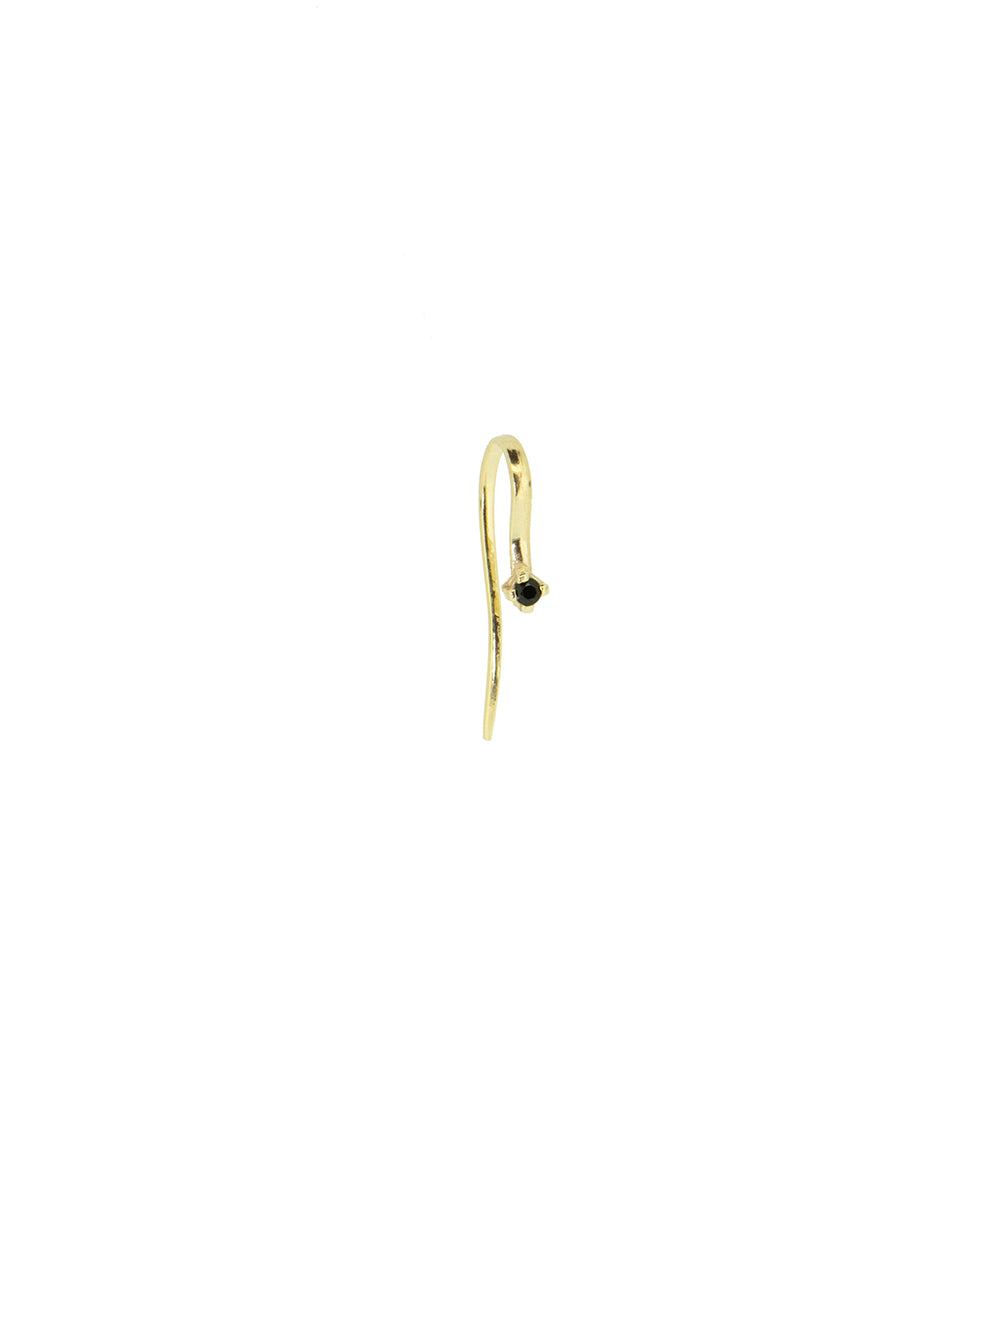 HOOK ME UP⎜Goldplated